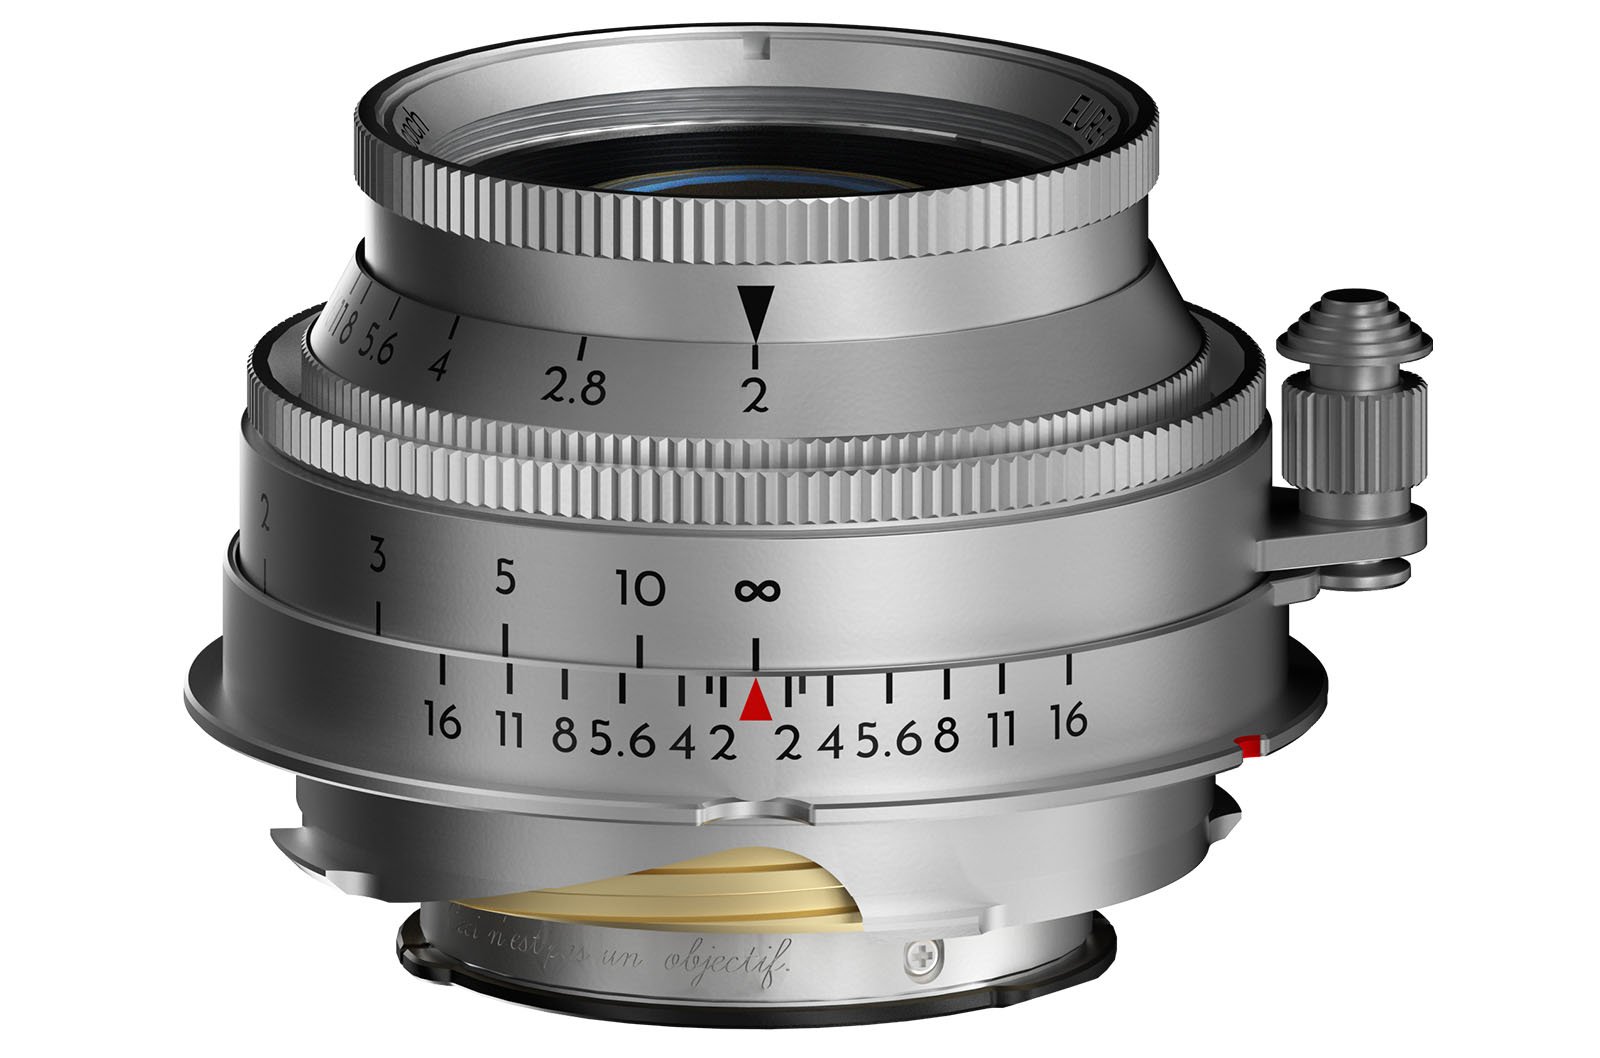 A close-up photo of a silver camera lens with a vintage design. The lens displays various distance and aperture markings, including f-stops from 1.5 to 16. The lens mount is visible at the bottom.